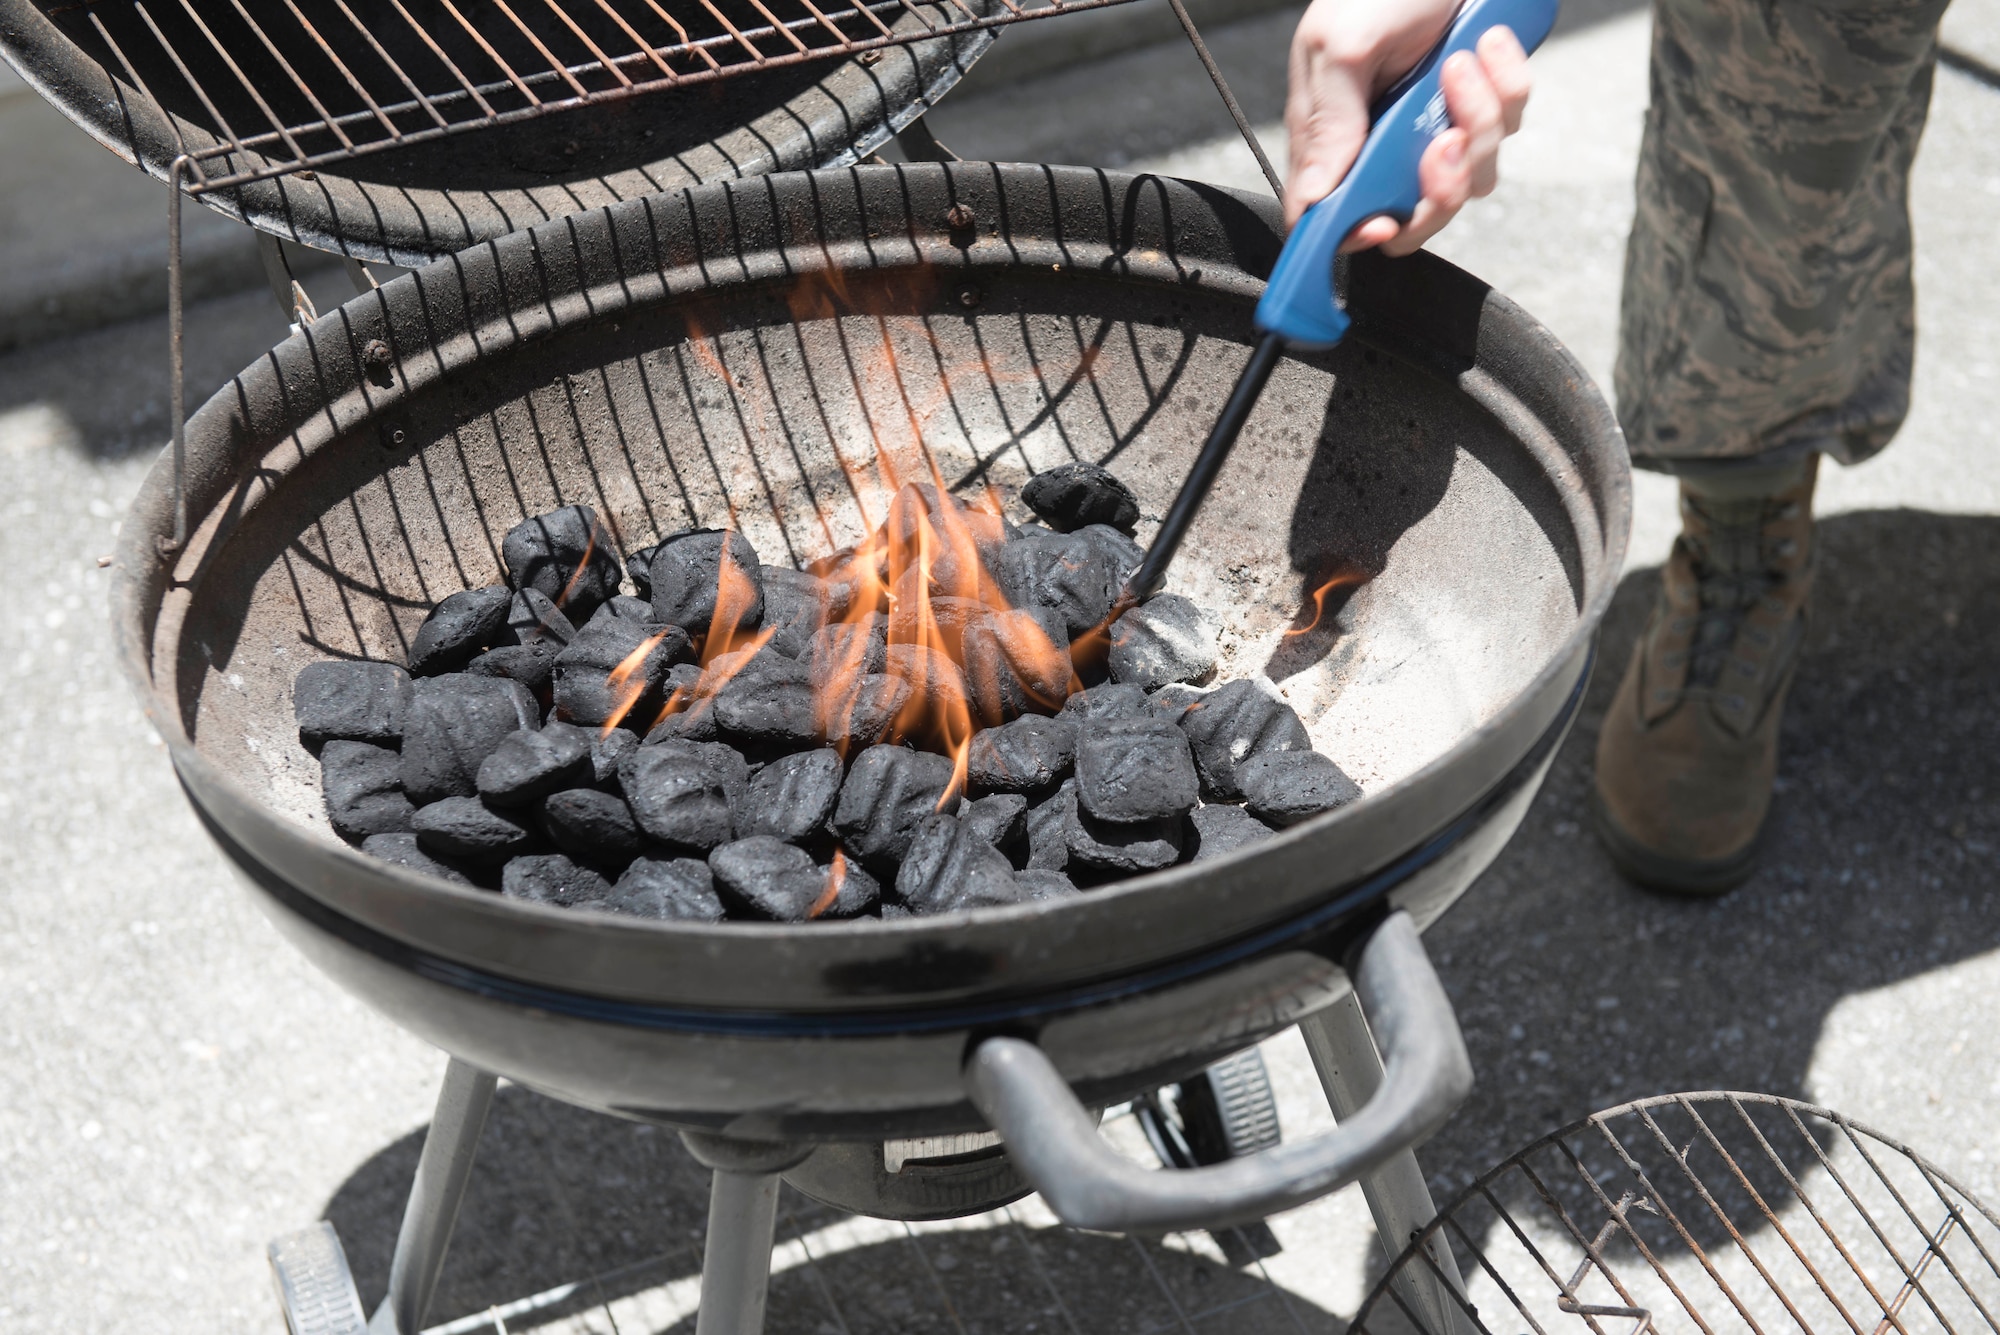 A U.S. Airman lights a barbeque June 28, 2017, at Kadena Air Base, Japan. During the summer, many individuals will barbecue and enjoy the outdoors. Maintaining safe fire handling practices can ensure fewer house fires occur. (U.S Air Force photo by Senior Airman Quay Drawdy)